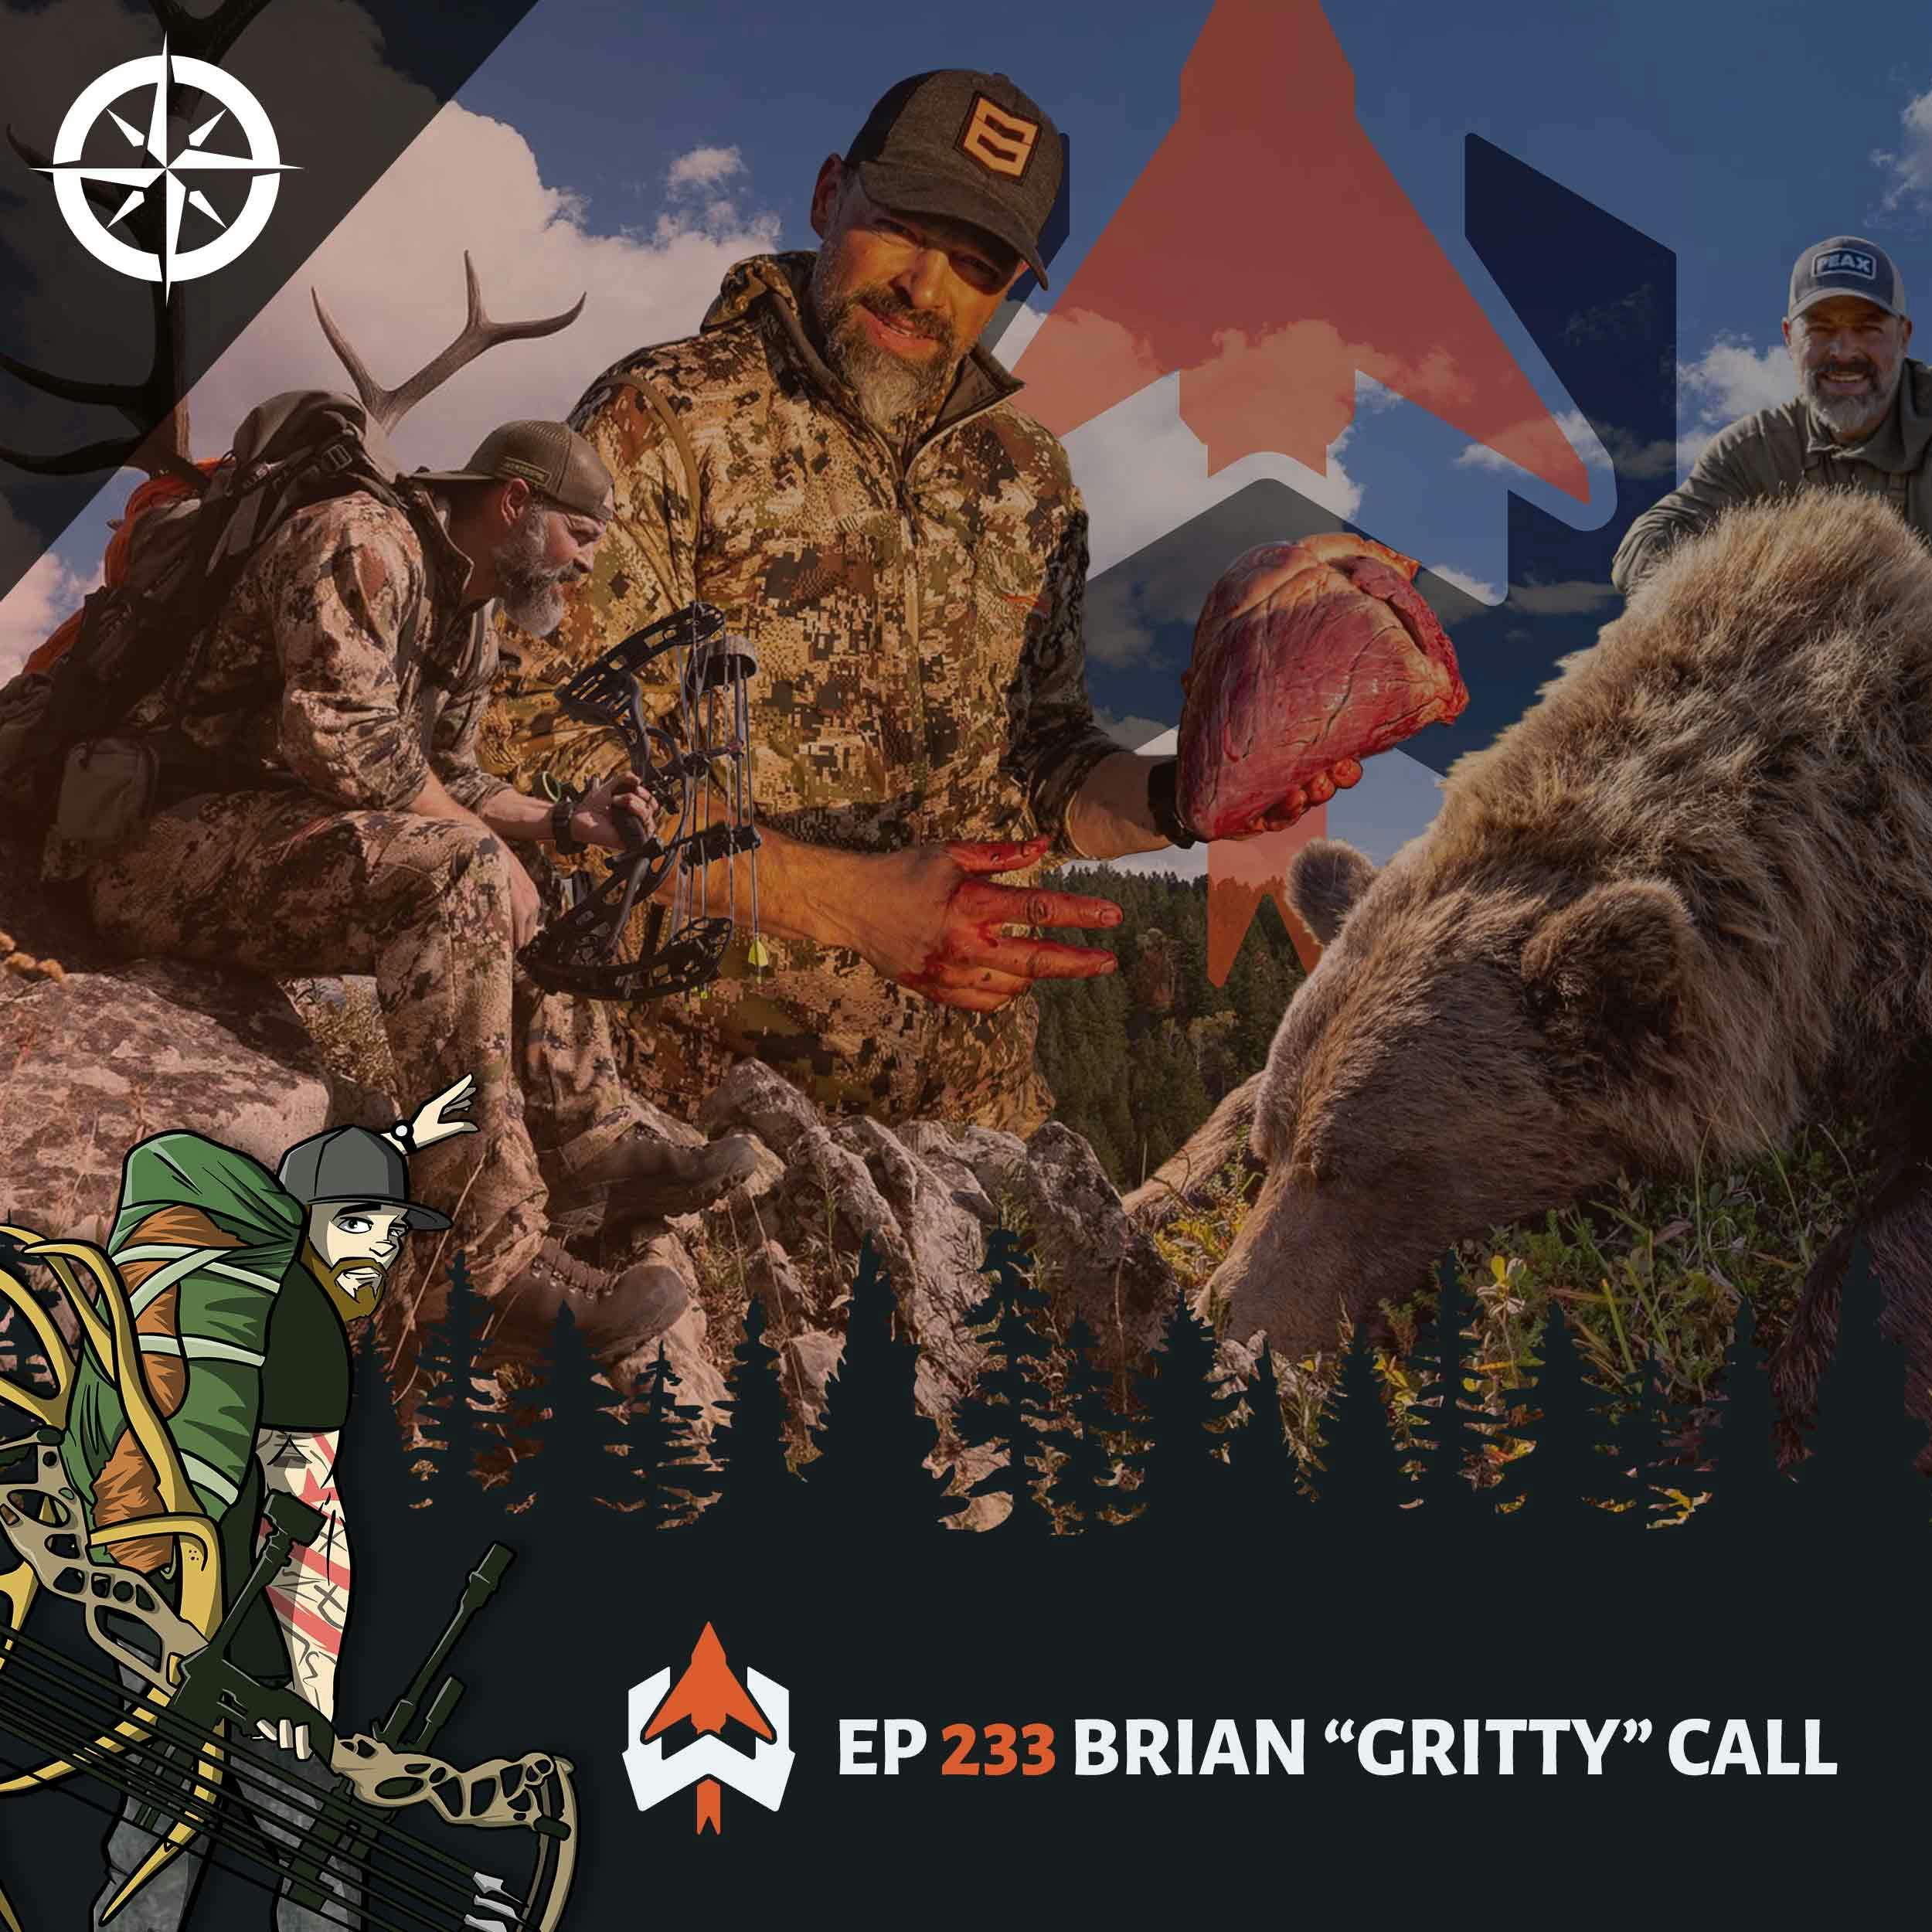 Ep 233 - Brian “Gritty” Call: Success Begets Success